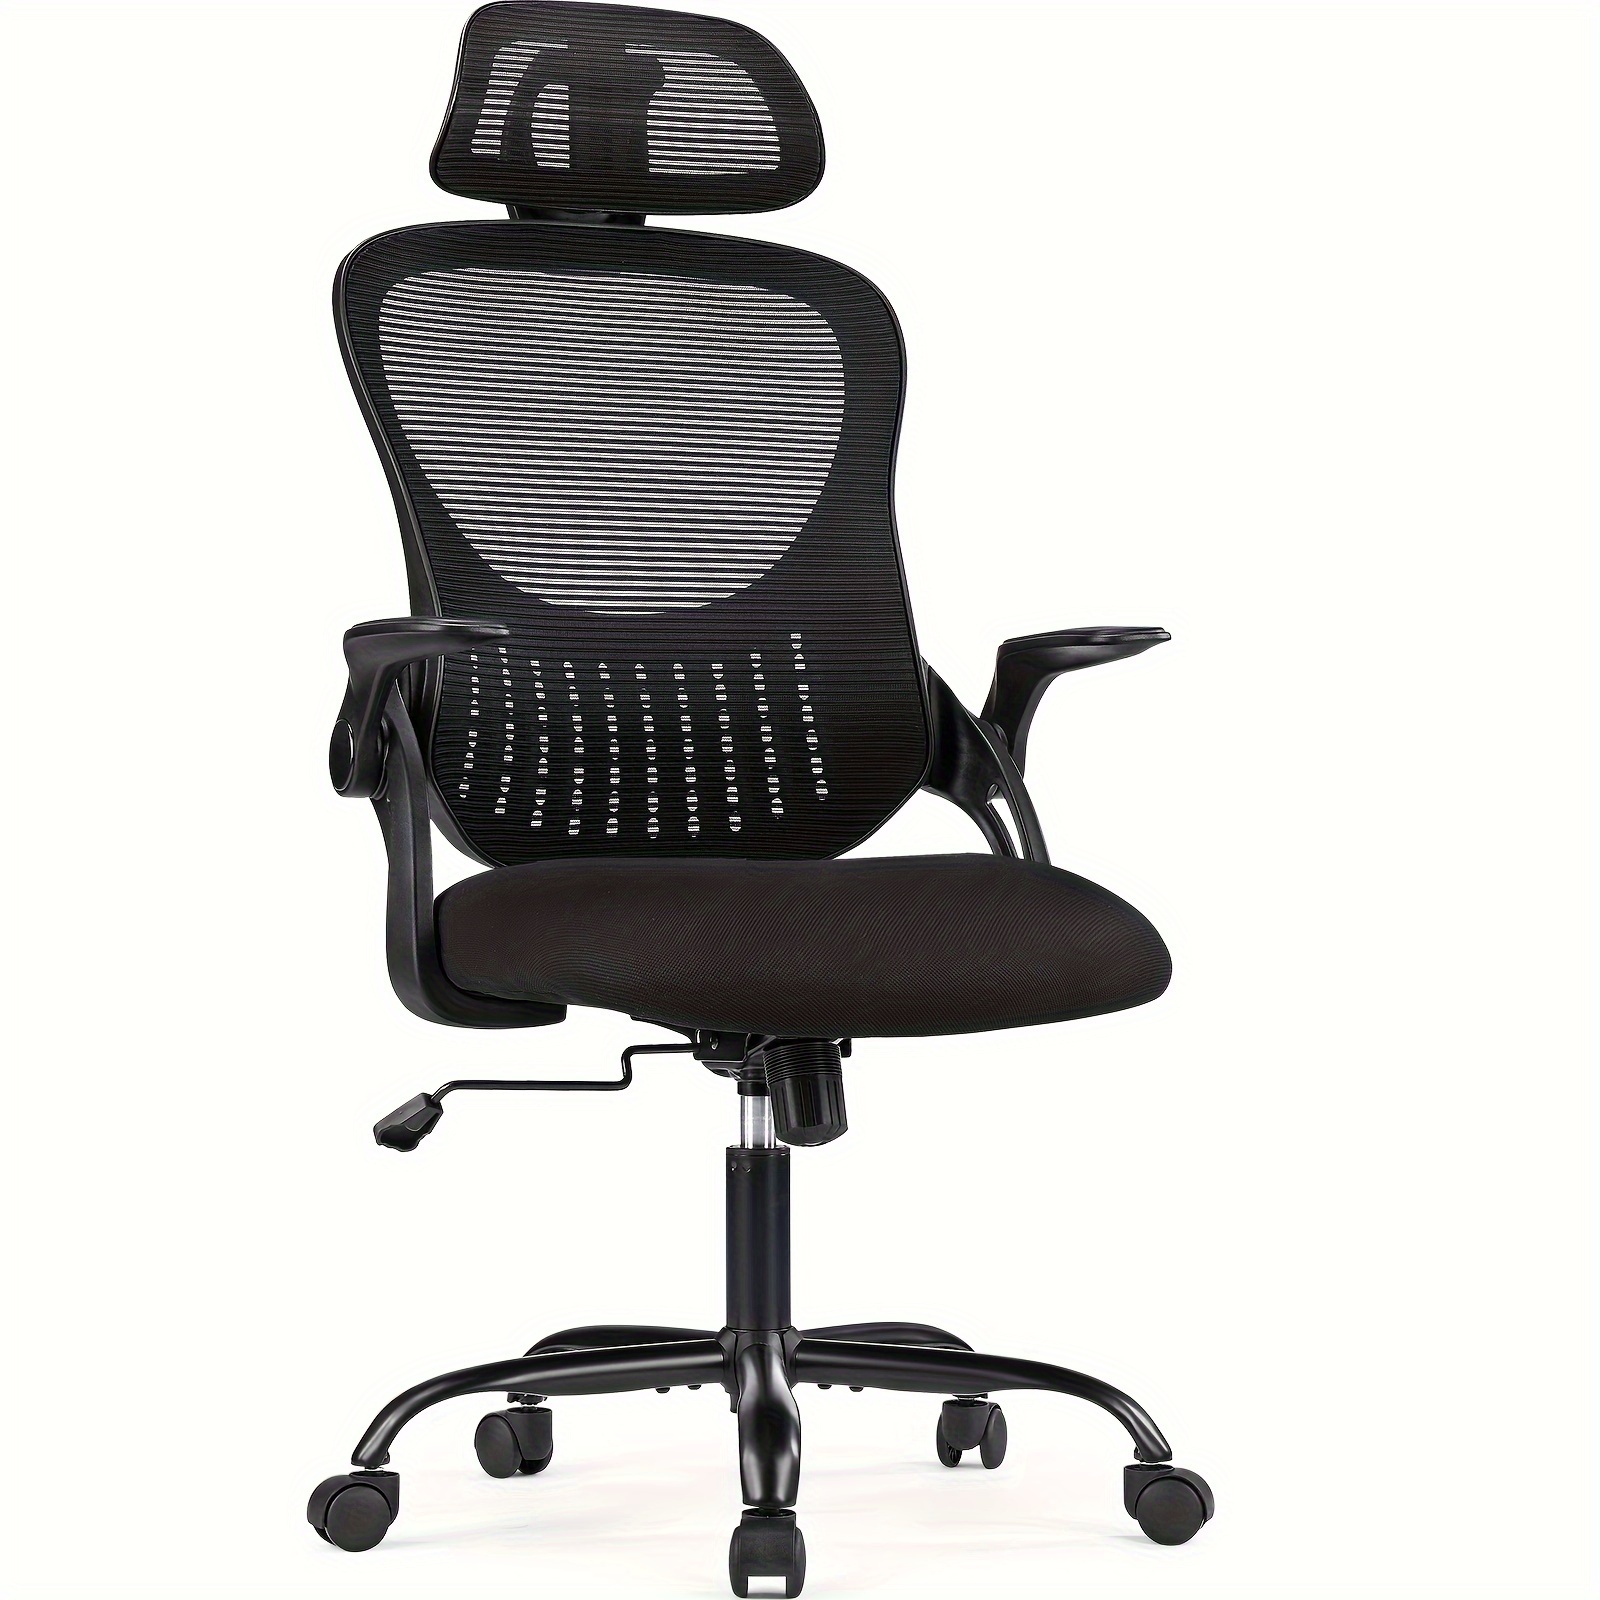 

Ergonomic Office Desk Computer Chair, High Back Comfy Swivel Home Gaming Mesh Chairs With Wheels, Adjustable Headrest, Comfortable Lumbar Support, Flip-up Arms, 144° Tilt For Bedroom, Study